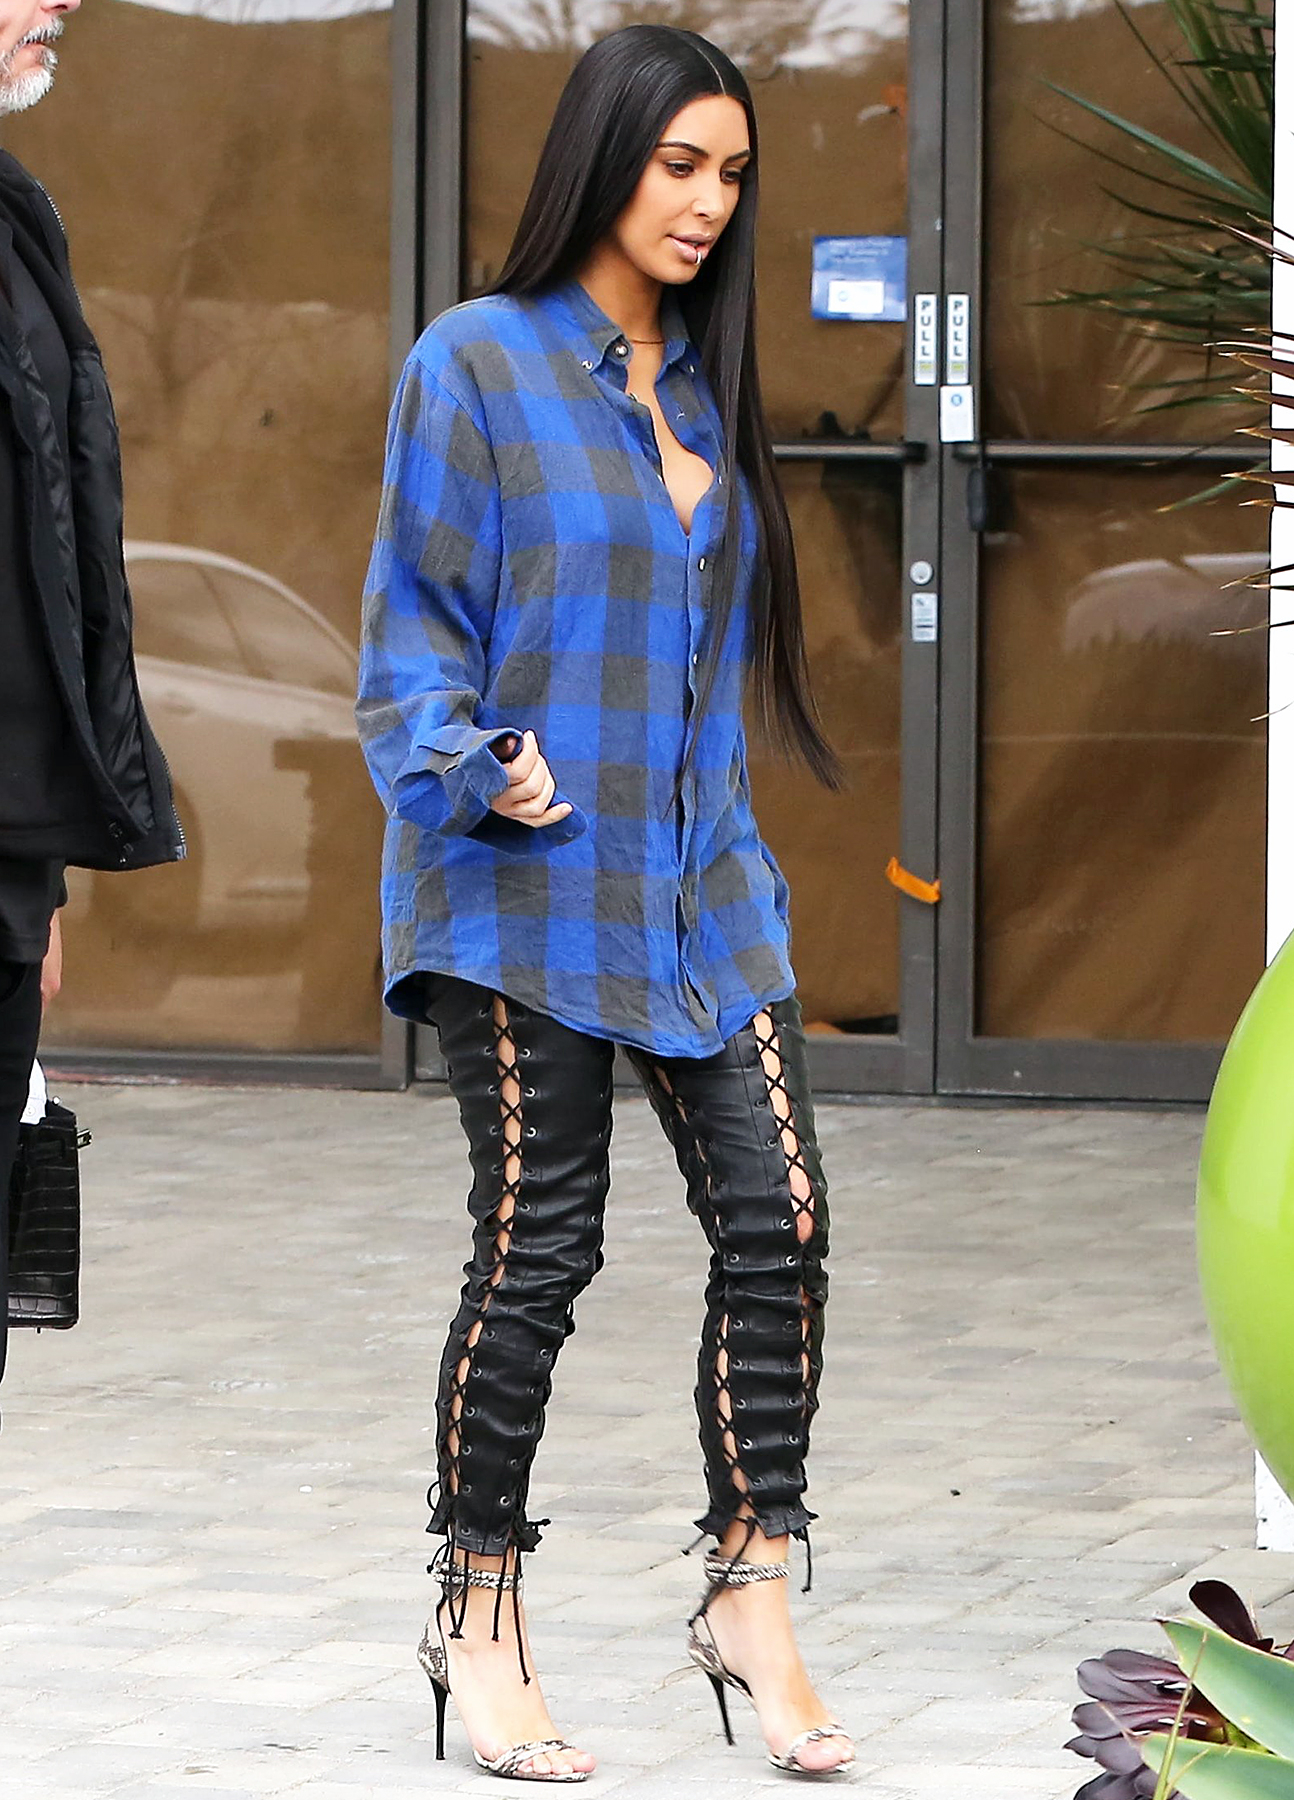 Kim Kardashian Paired a Leather Crop Top With Lace-Up Pants